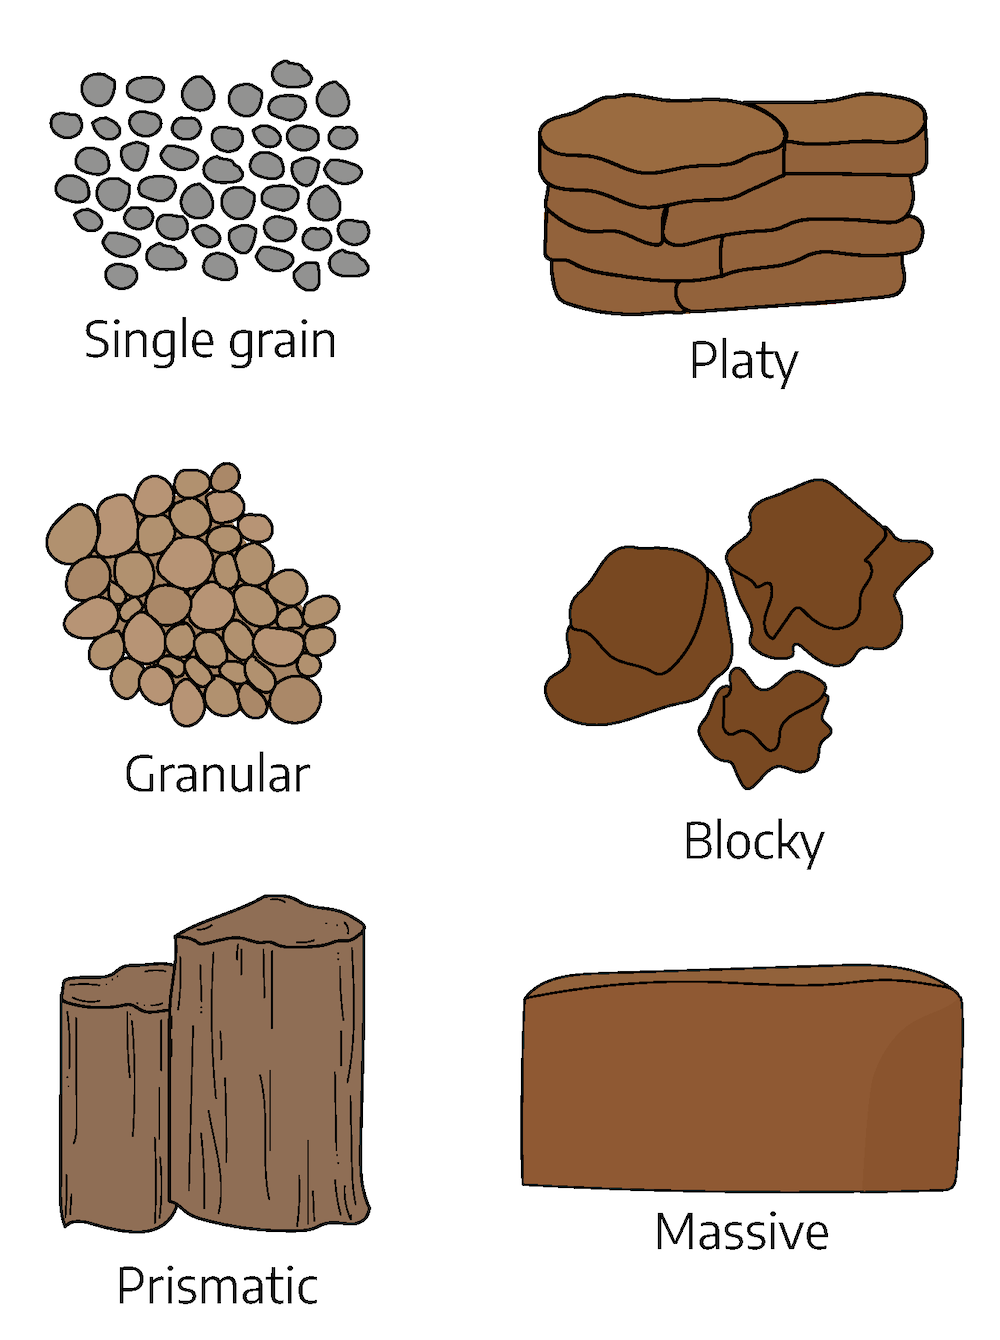 Drawings of soil structures including: small spaced circles labeled single grain, rounded touching mass labeled granular, larger angular columnar chunks labeled prismatic, stacked flat plates labeled platy, angular chunks labeled blocky, and a solid rectangle labeled massive.